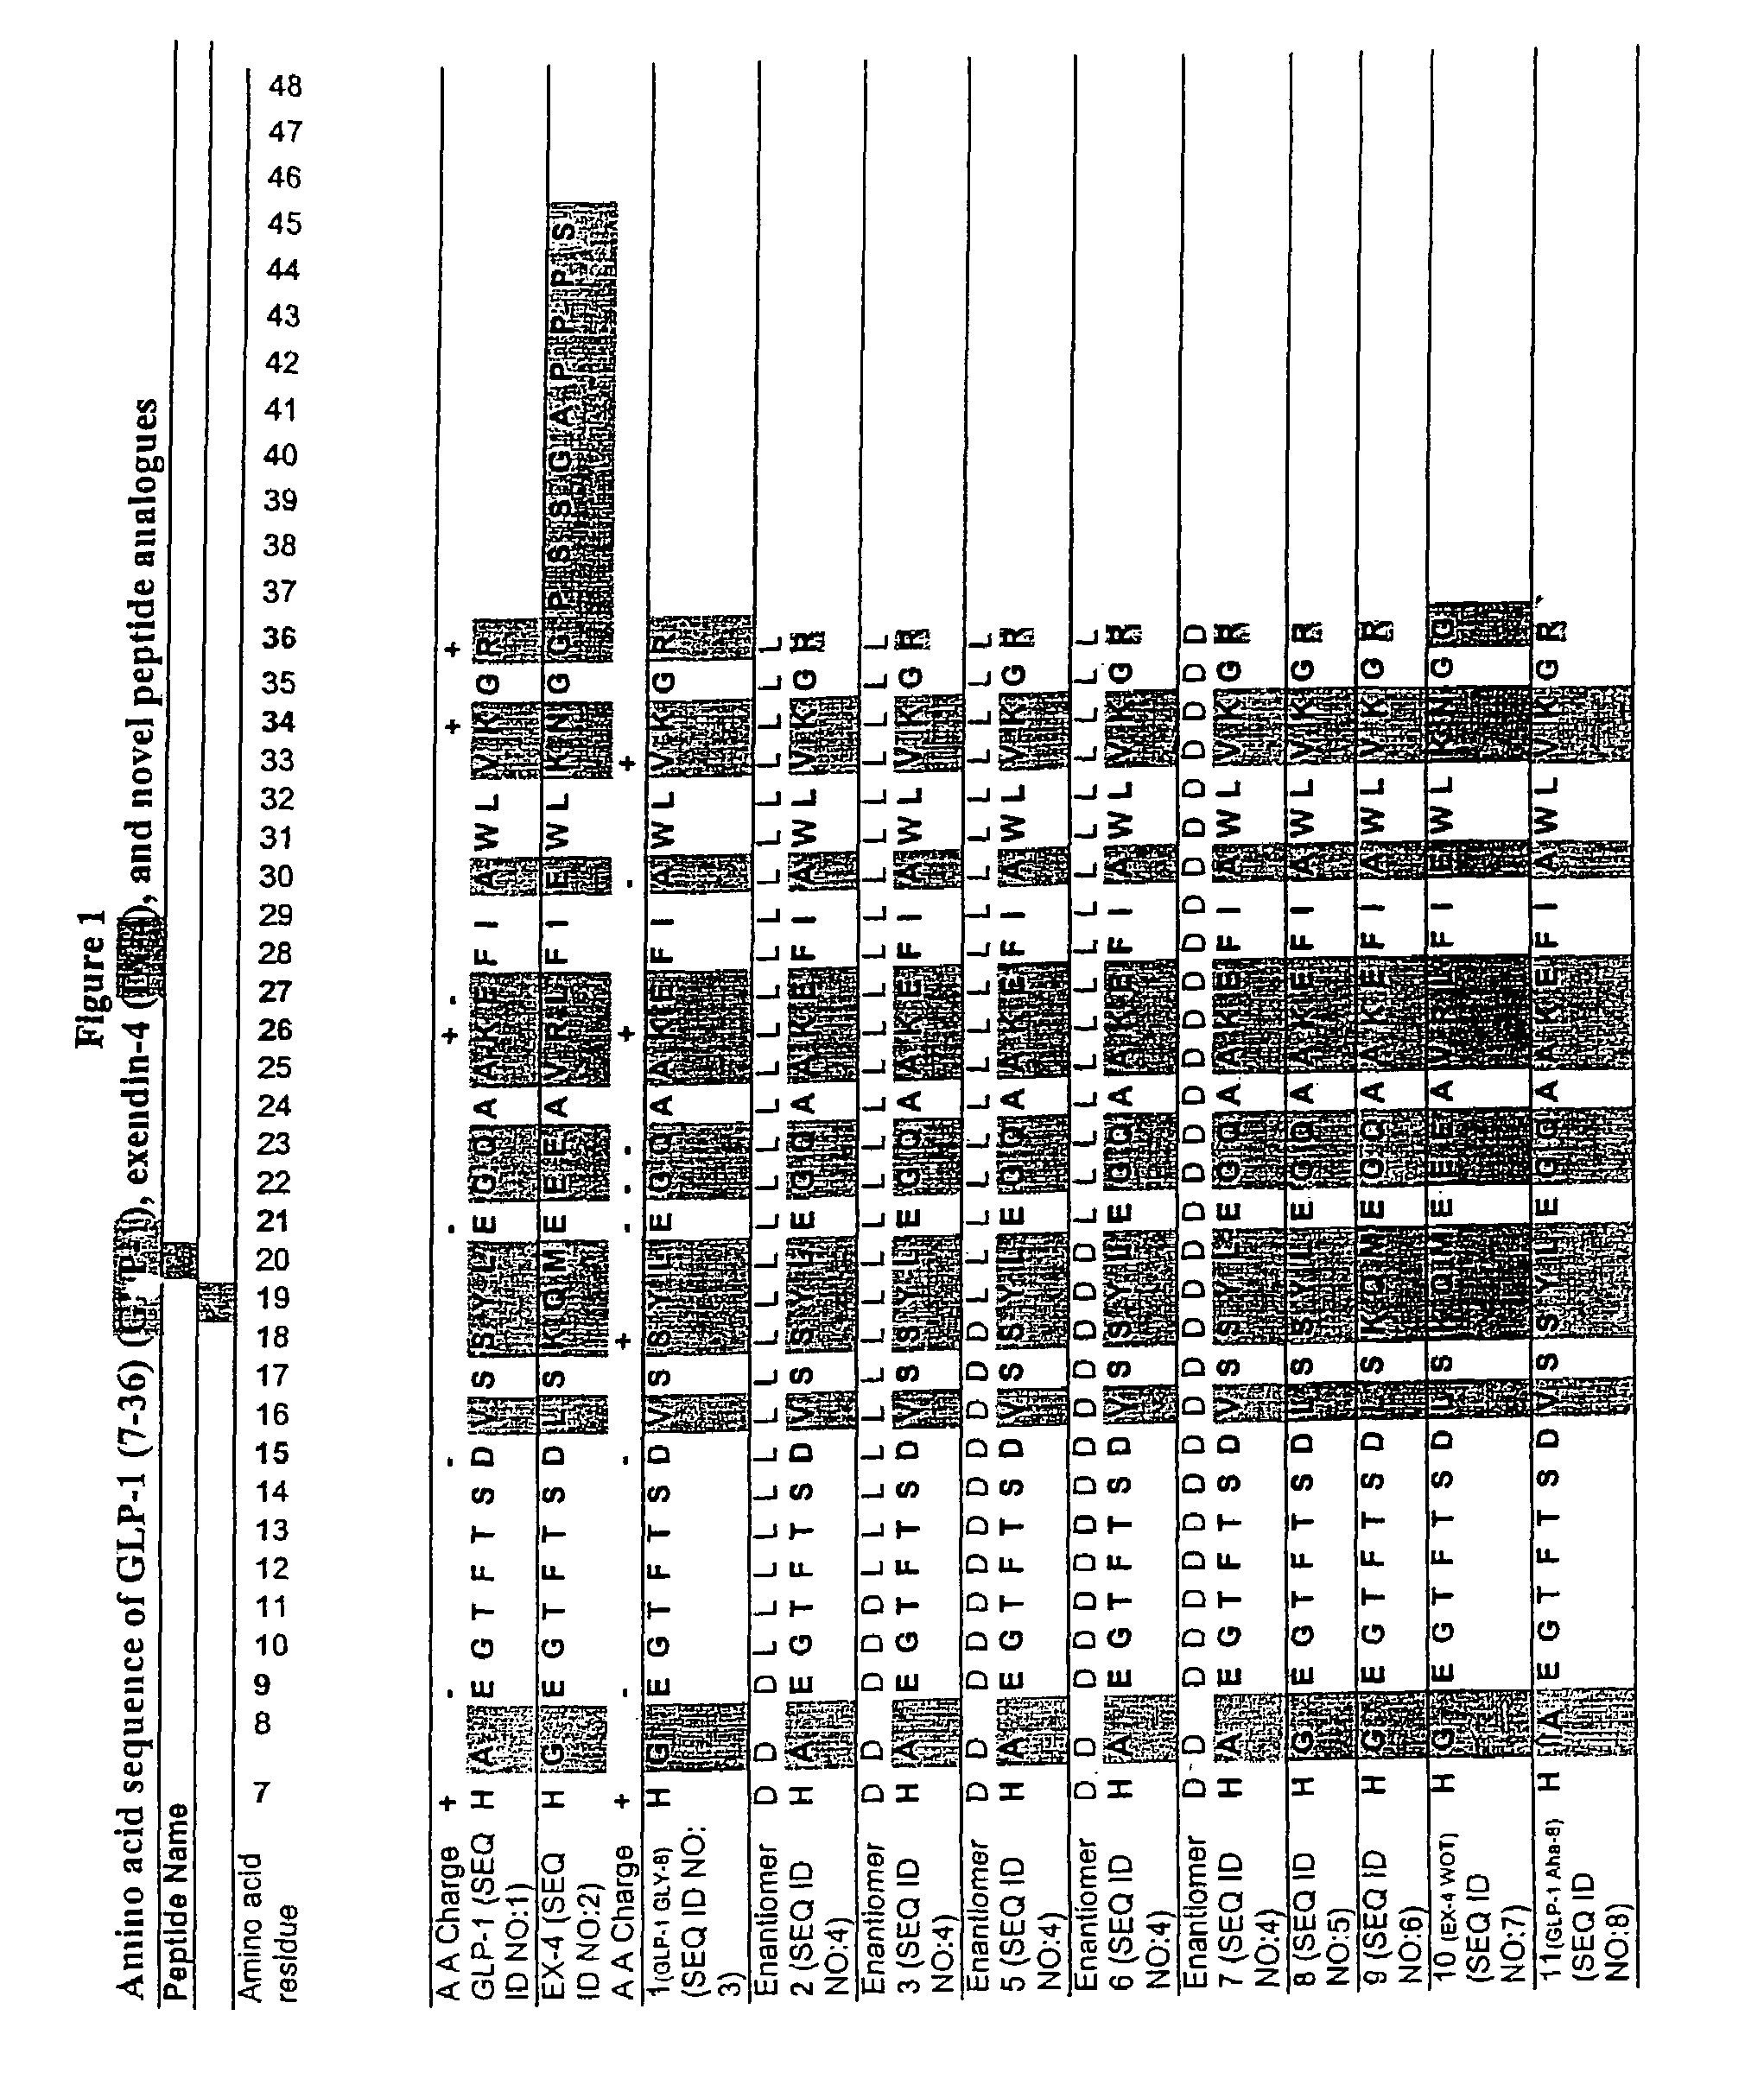 GLP-1 exendin-4 peptide analogs and uses thereof